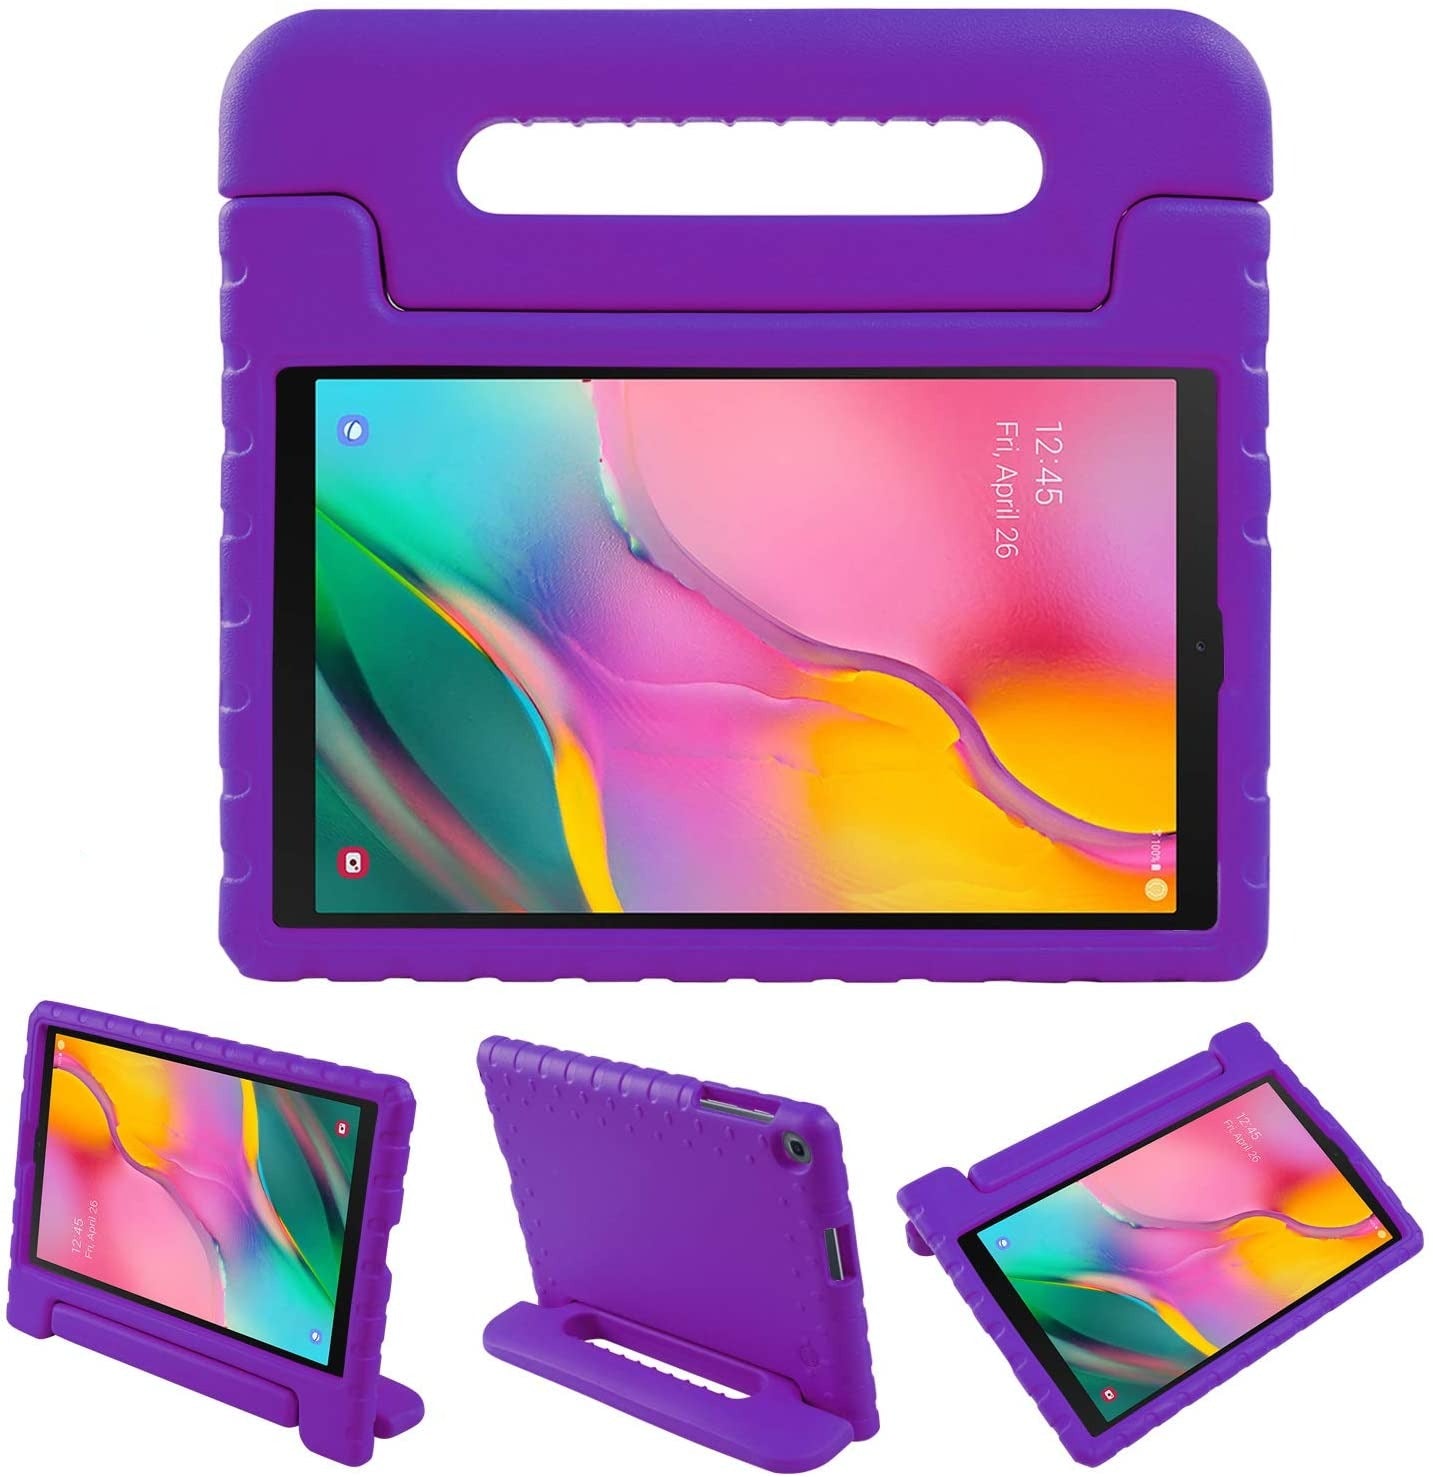 NEWSTYLE Kids Case for Tab A 10.1 2019, Shockproof Light Weight Protection Handle Stand Case for Samsung Galaxy Tab A 10.1 Inch (SM-T510/T515) Tablet 2019 Release (Purple) - e4cents